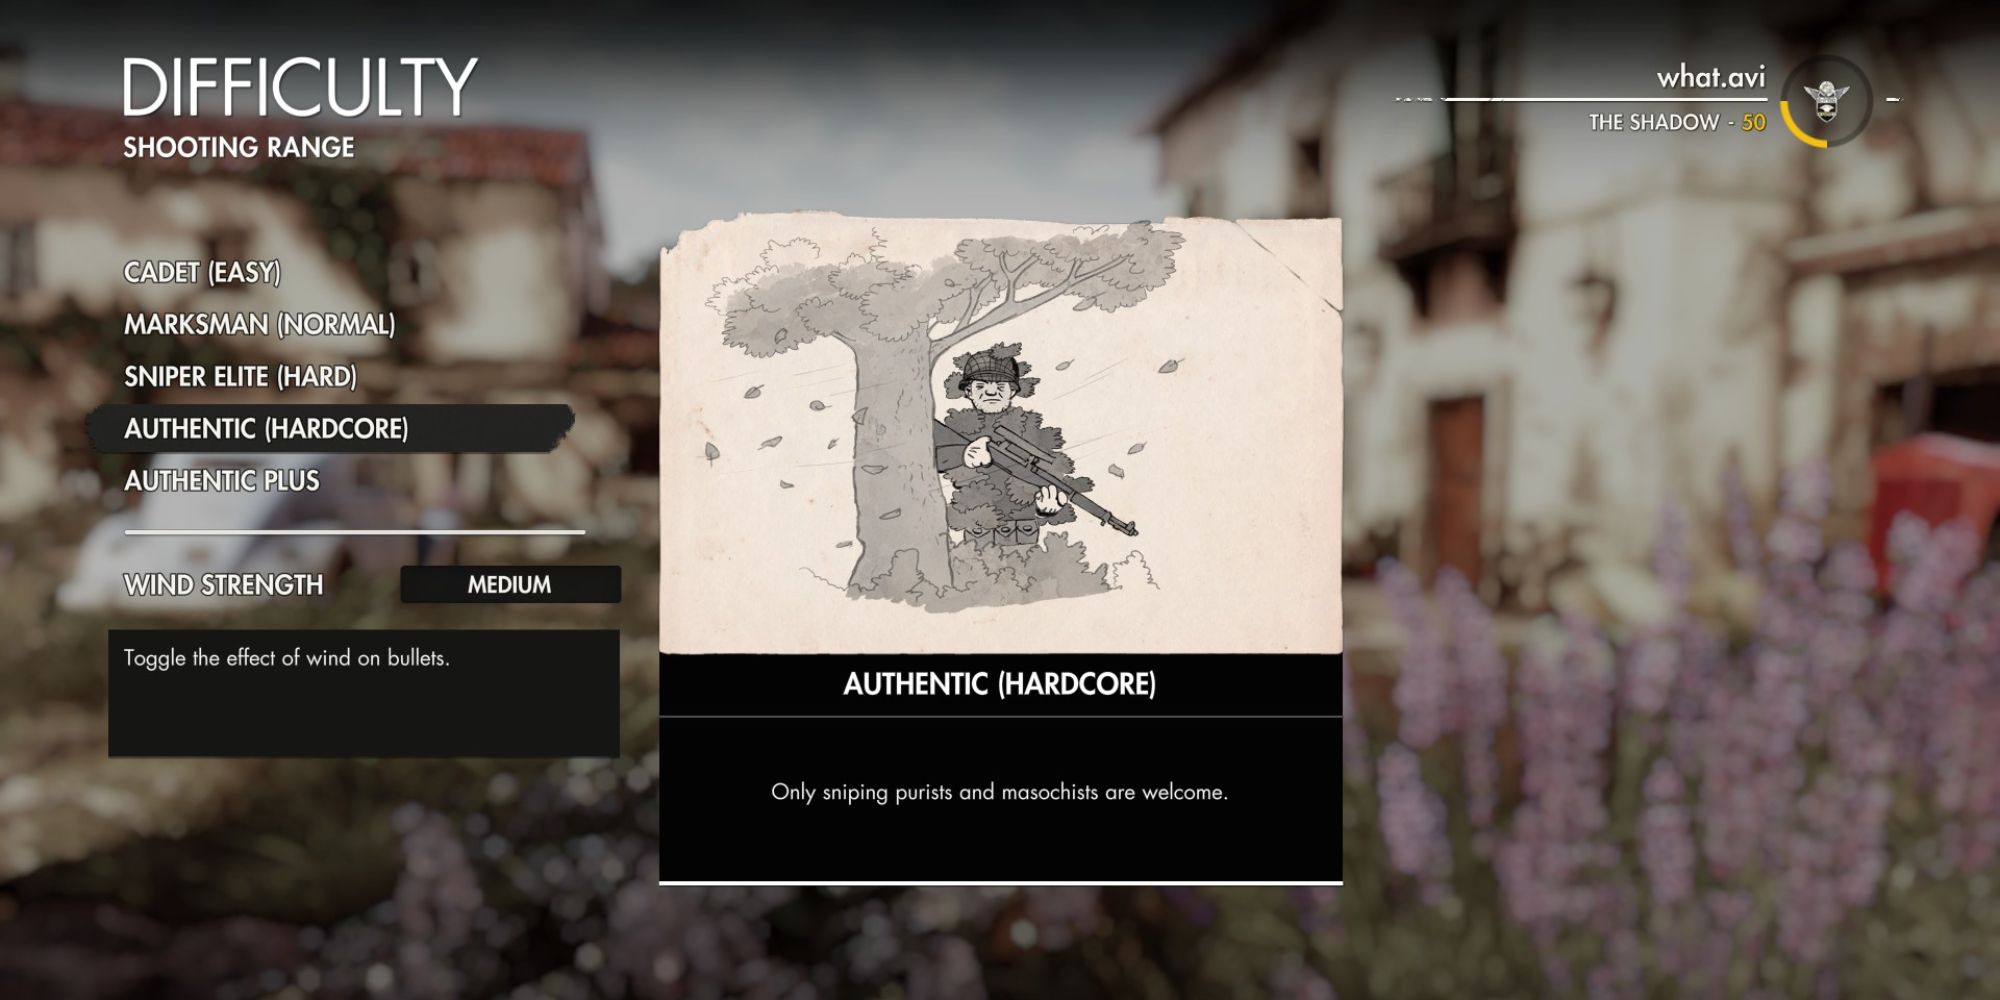 sniper elite difficulty setting